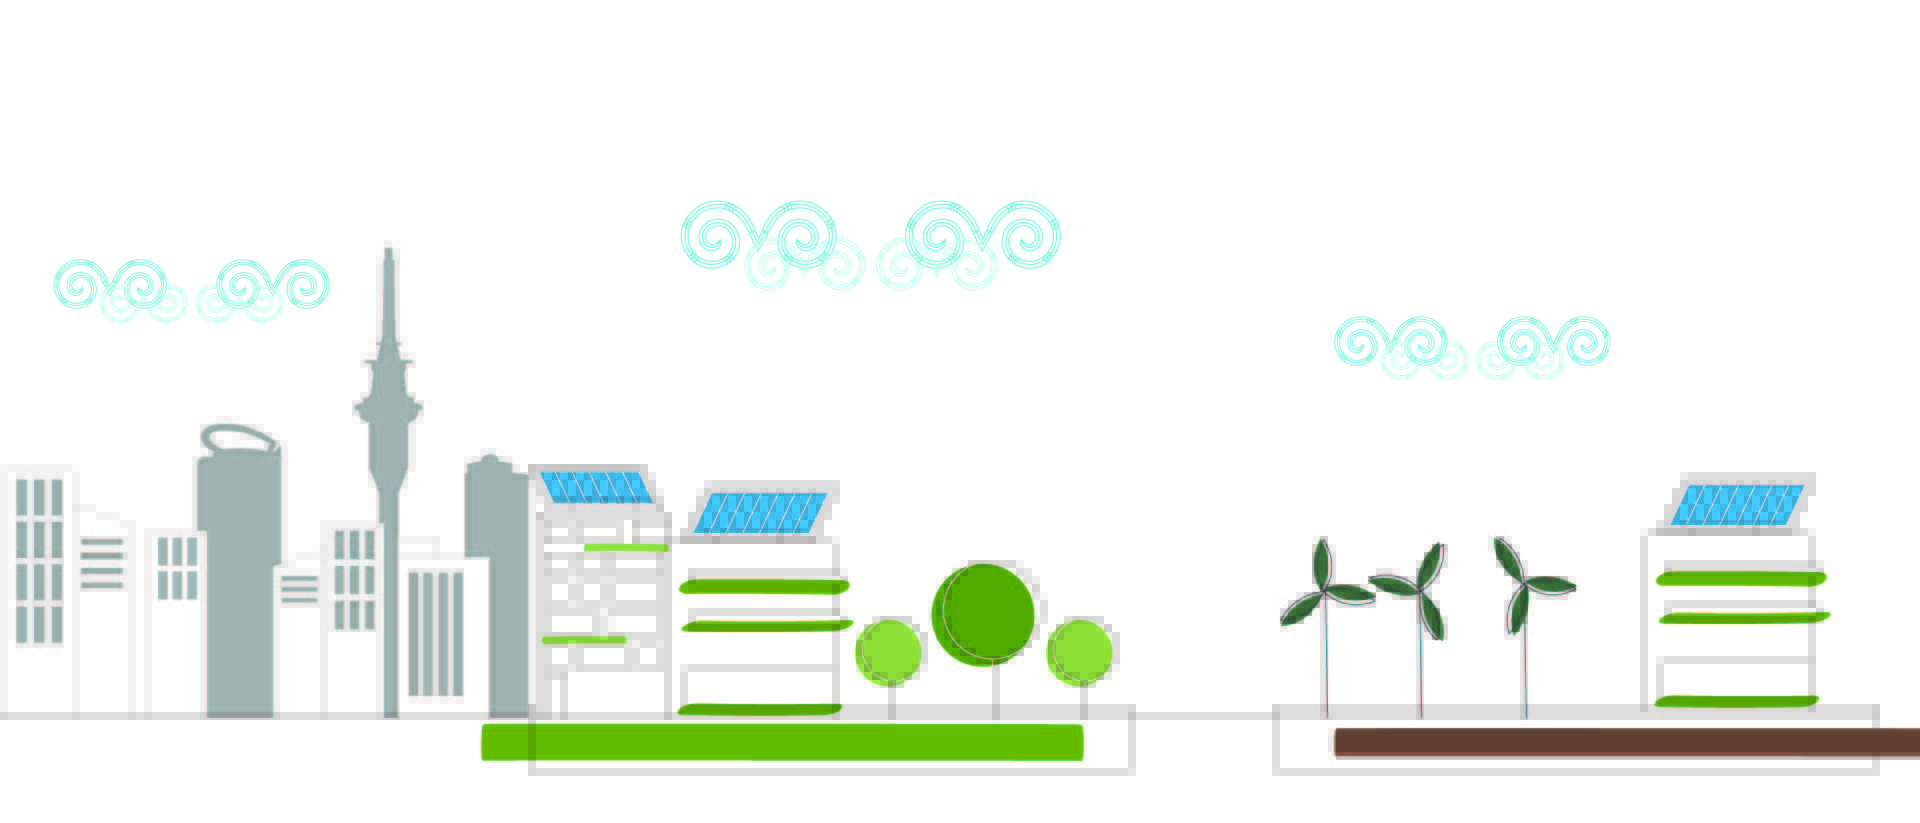 Drawing of Auckland's buildings, green areas, and generators of sustainable energy: solar panels on the roofs and wind turbines.